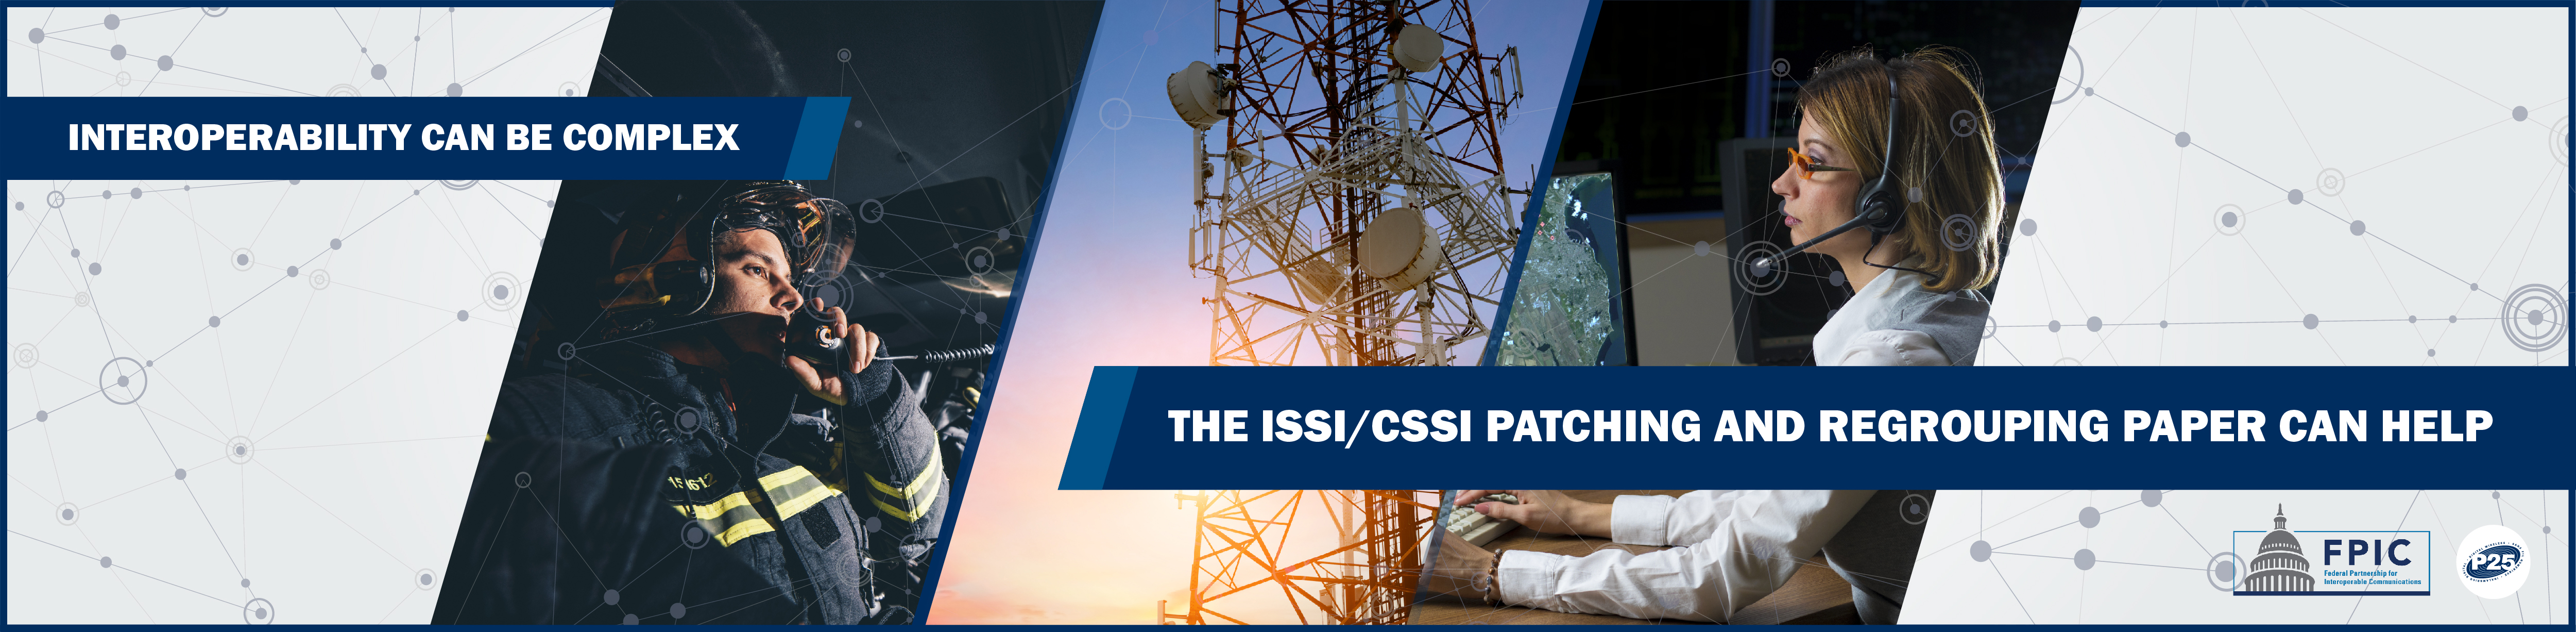 Interoperability Can Be Complex. The ISSI/CSSI Patching and Regrouping Paper Can Help